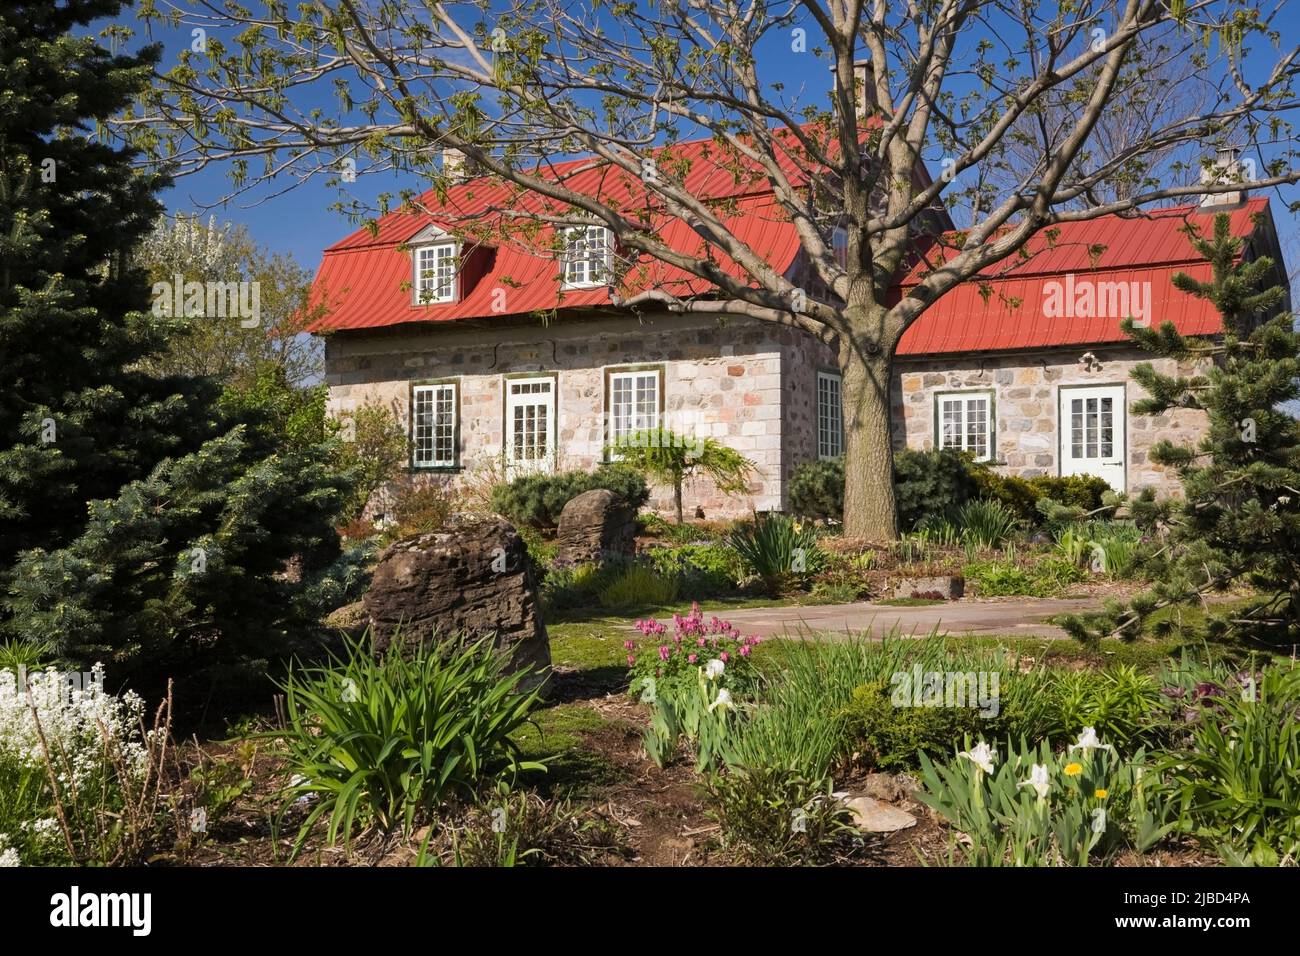 Old 1838 Canadiana fieldstone cottage style home with red sheet metal roof and landscaped front yard garden in spring. Stock Photo